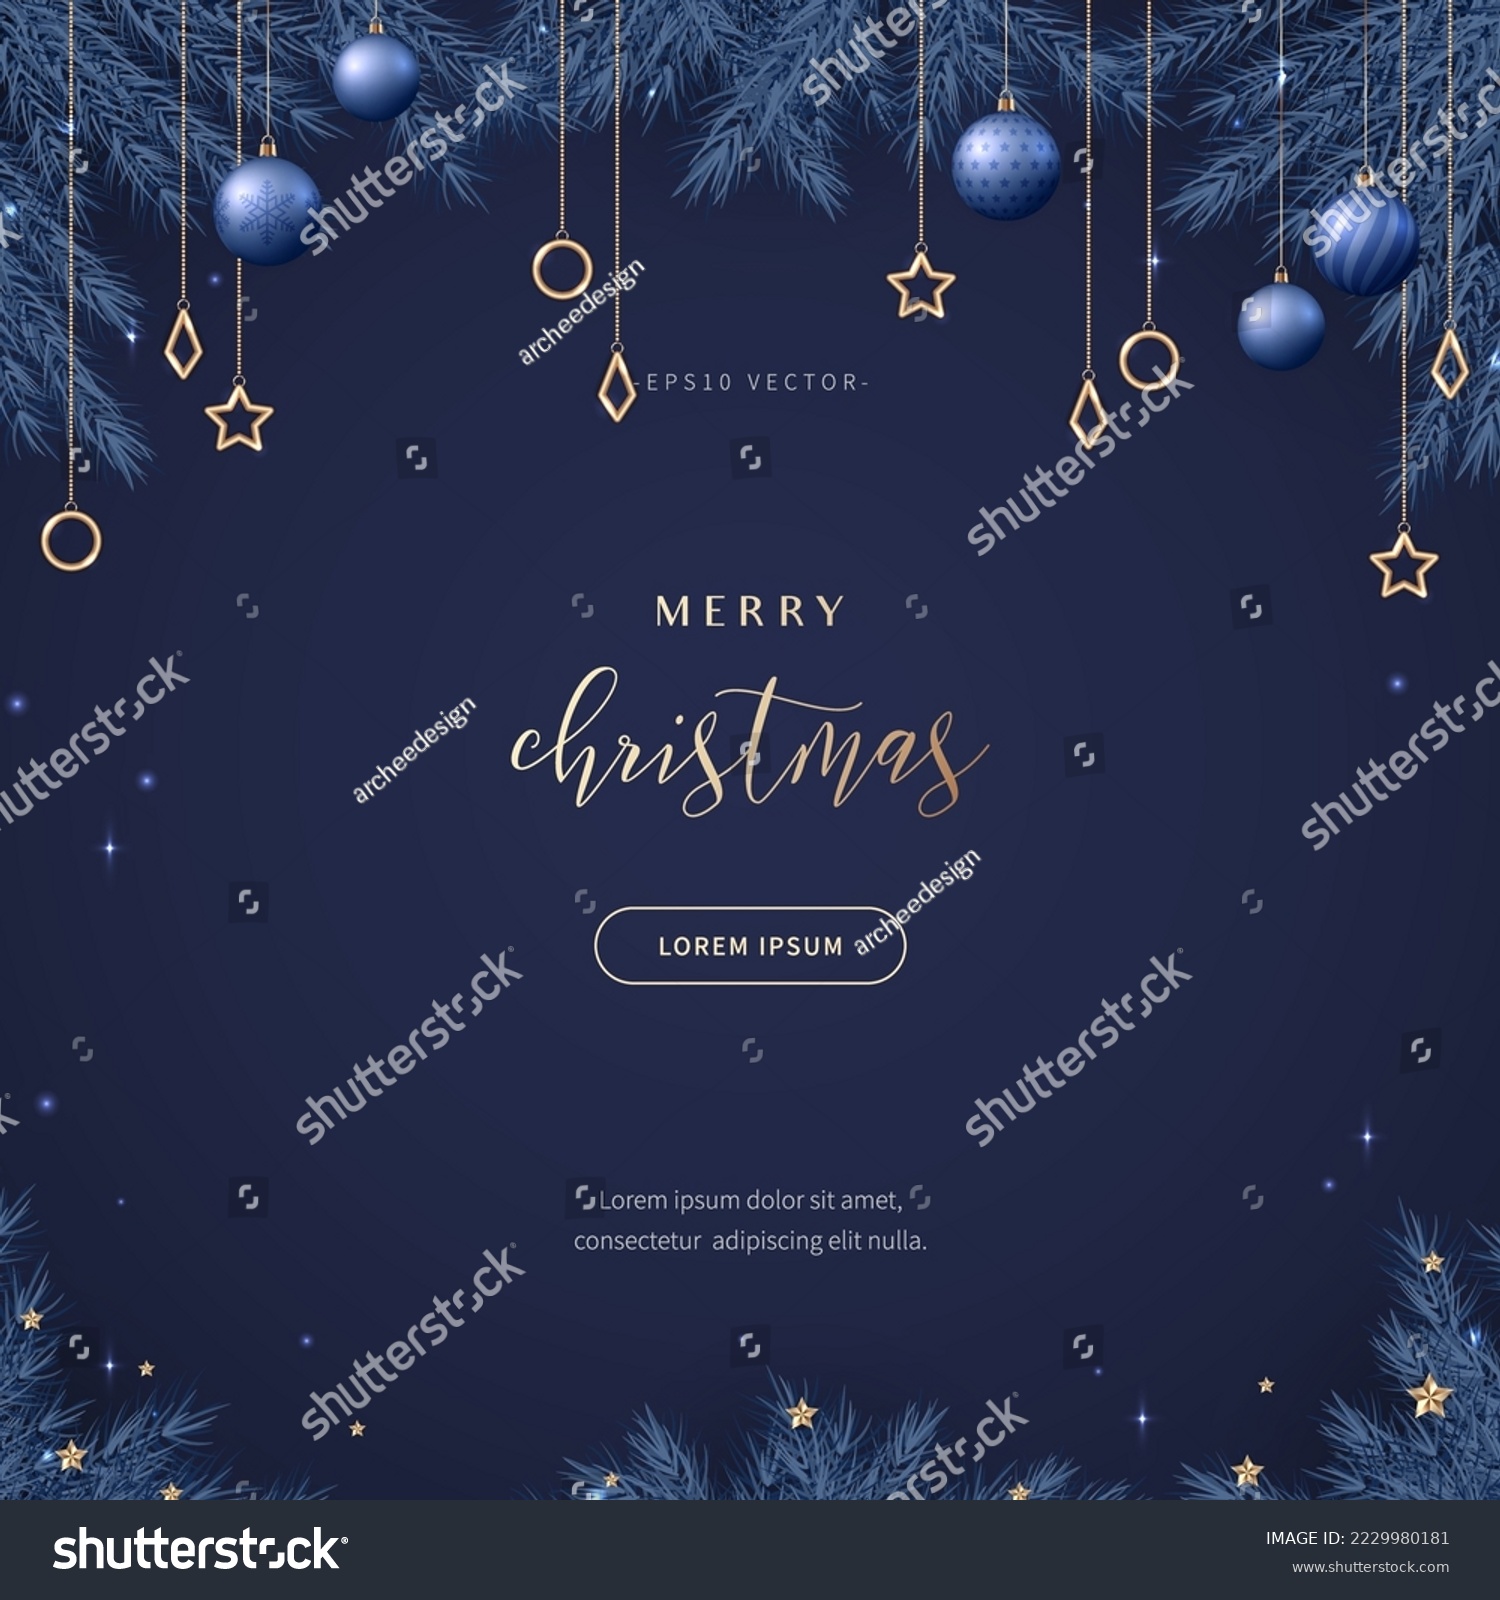 holiday concept banner composed of elements of christmas graphic sources. magical background with blue color illustration. winter season design for web page, promotion, print. vector design of eps 10. #2229980181